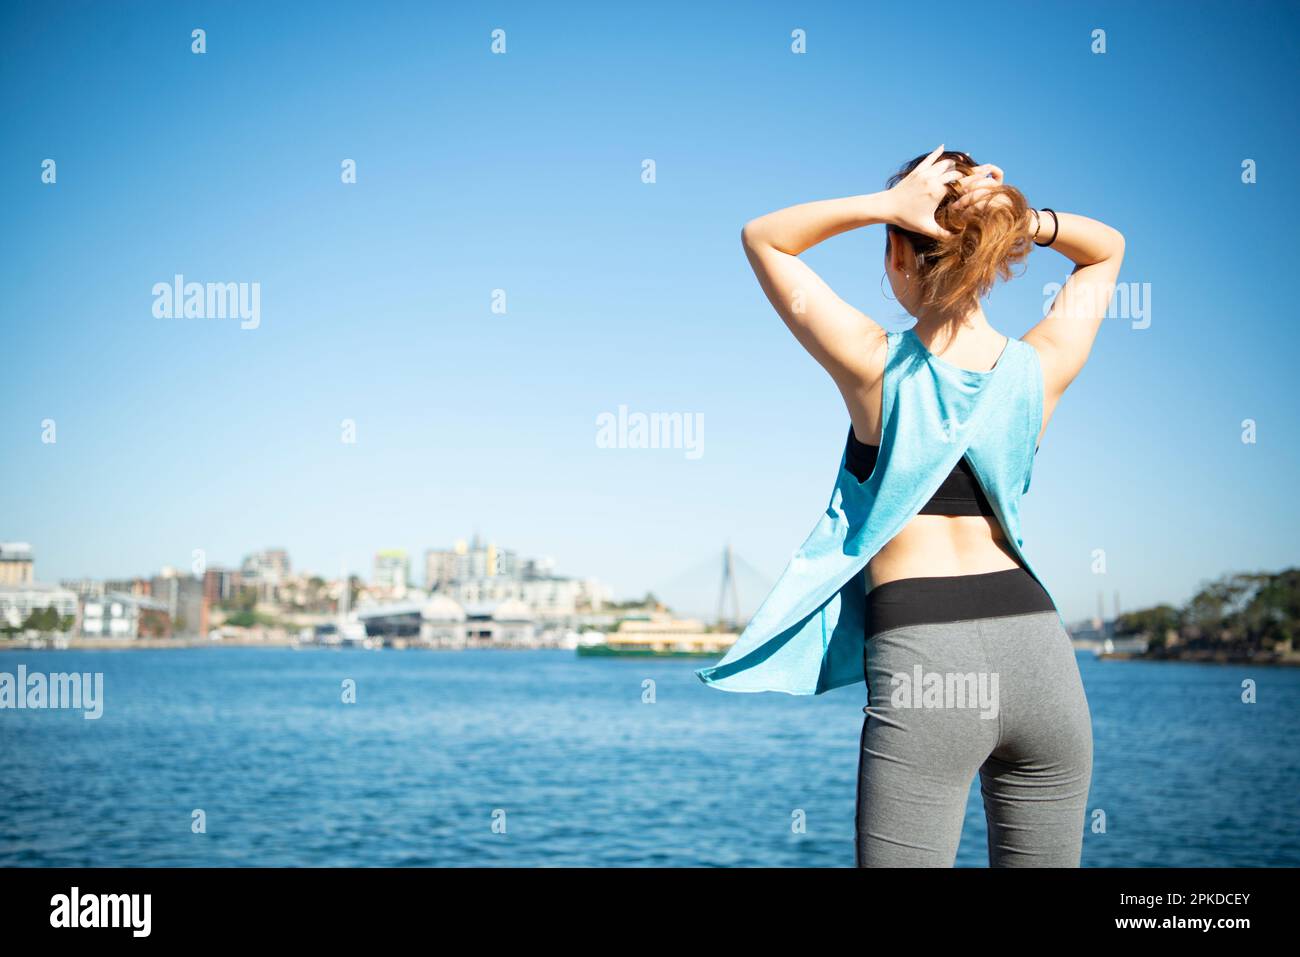 Back view of woman tying her hair while exercising Stock Photo